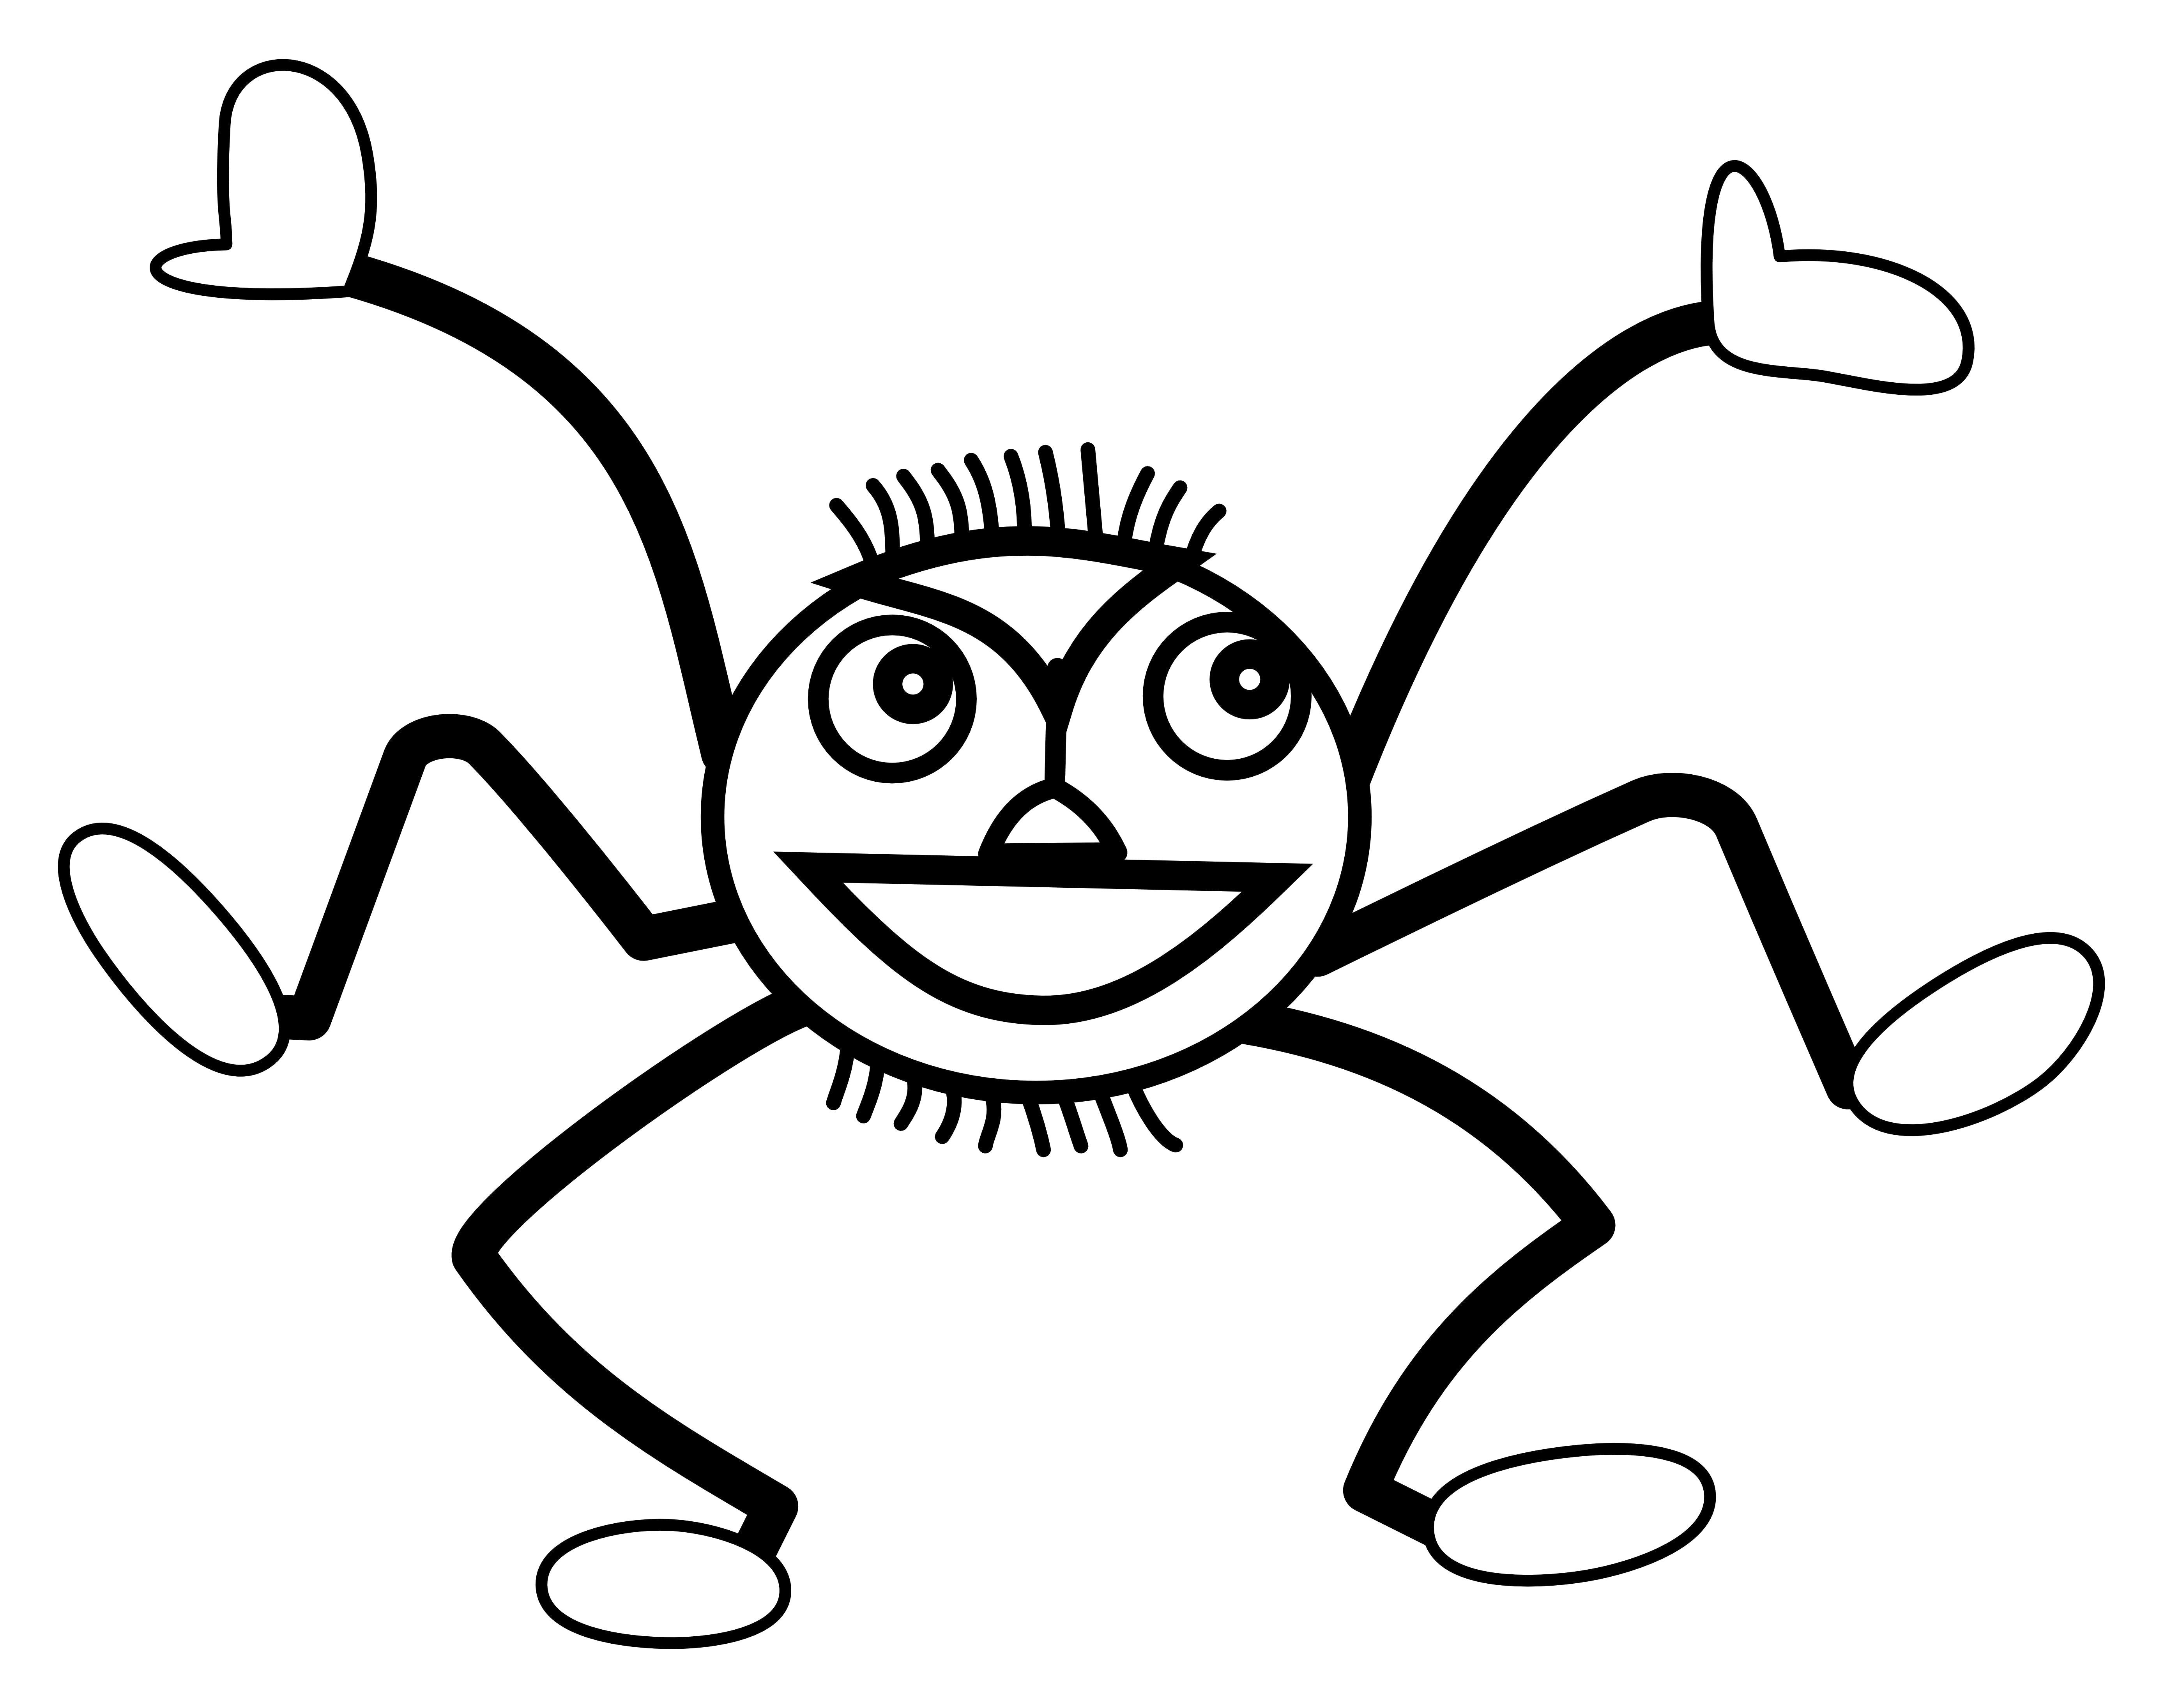 Fun coloring book spider for students